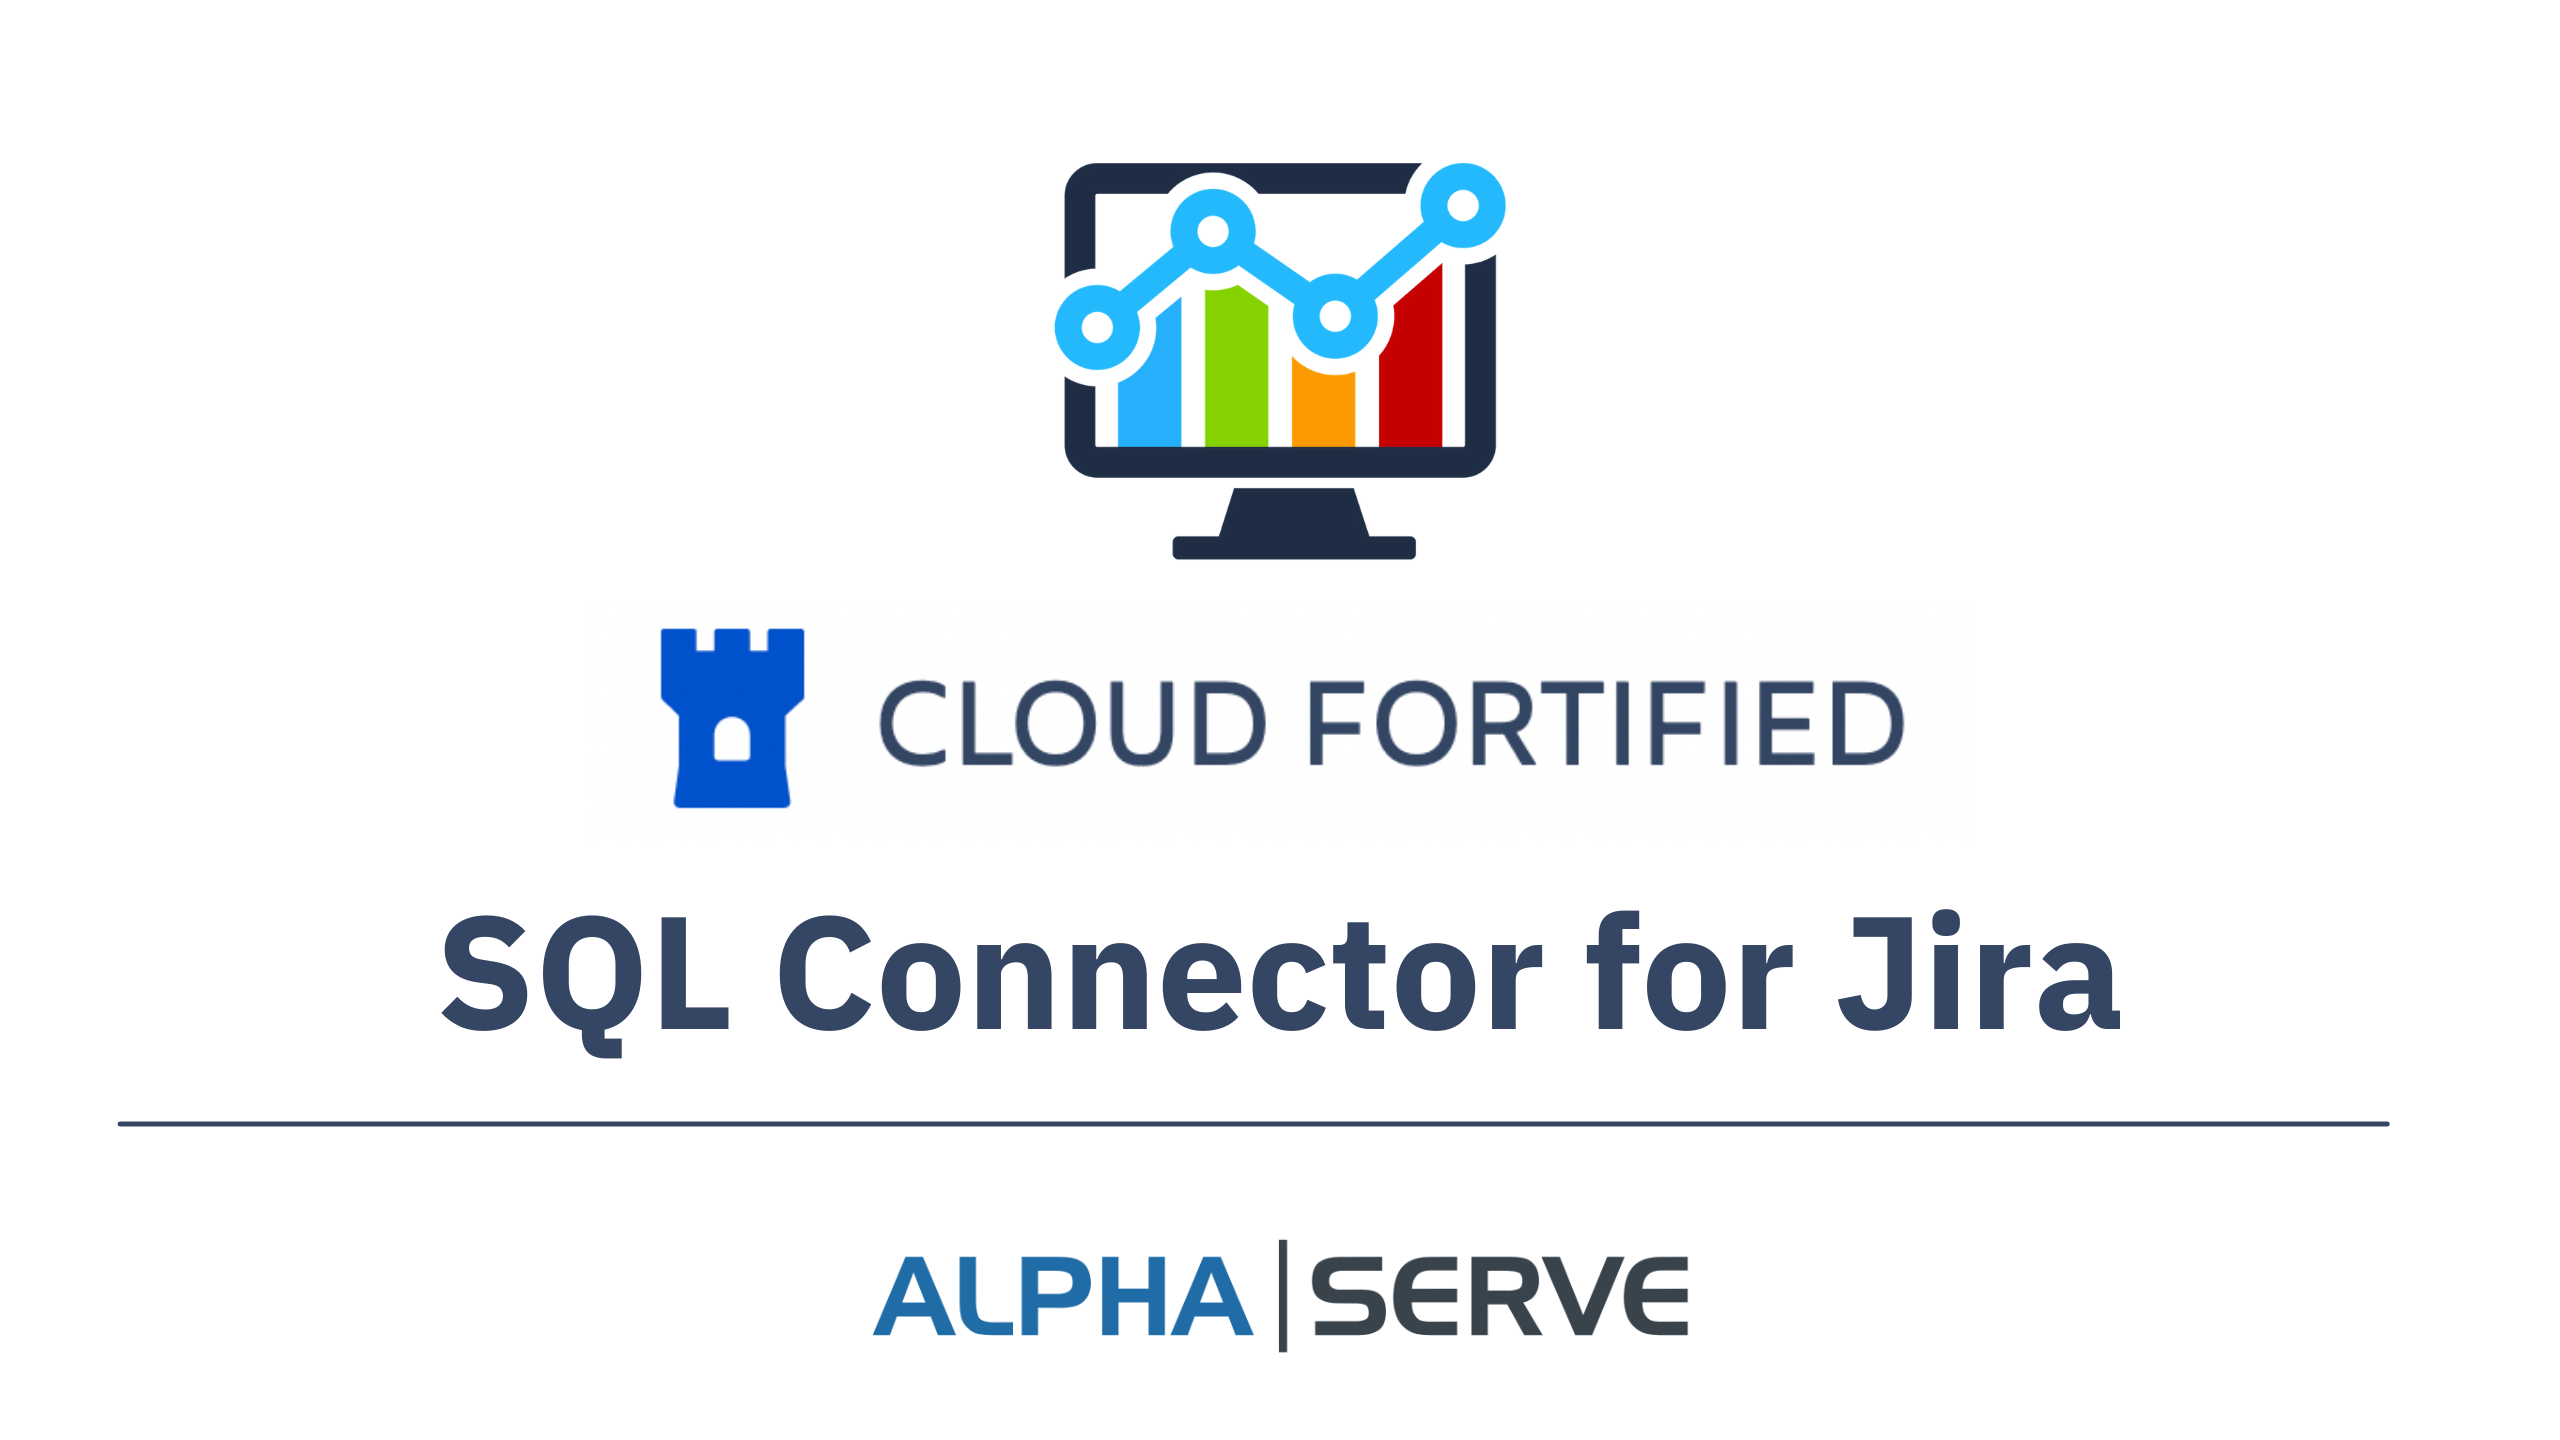 SQL Connector for Jira by Alpha Serve is Now a Cloud Fortified App on the Atlassian Marketplace